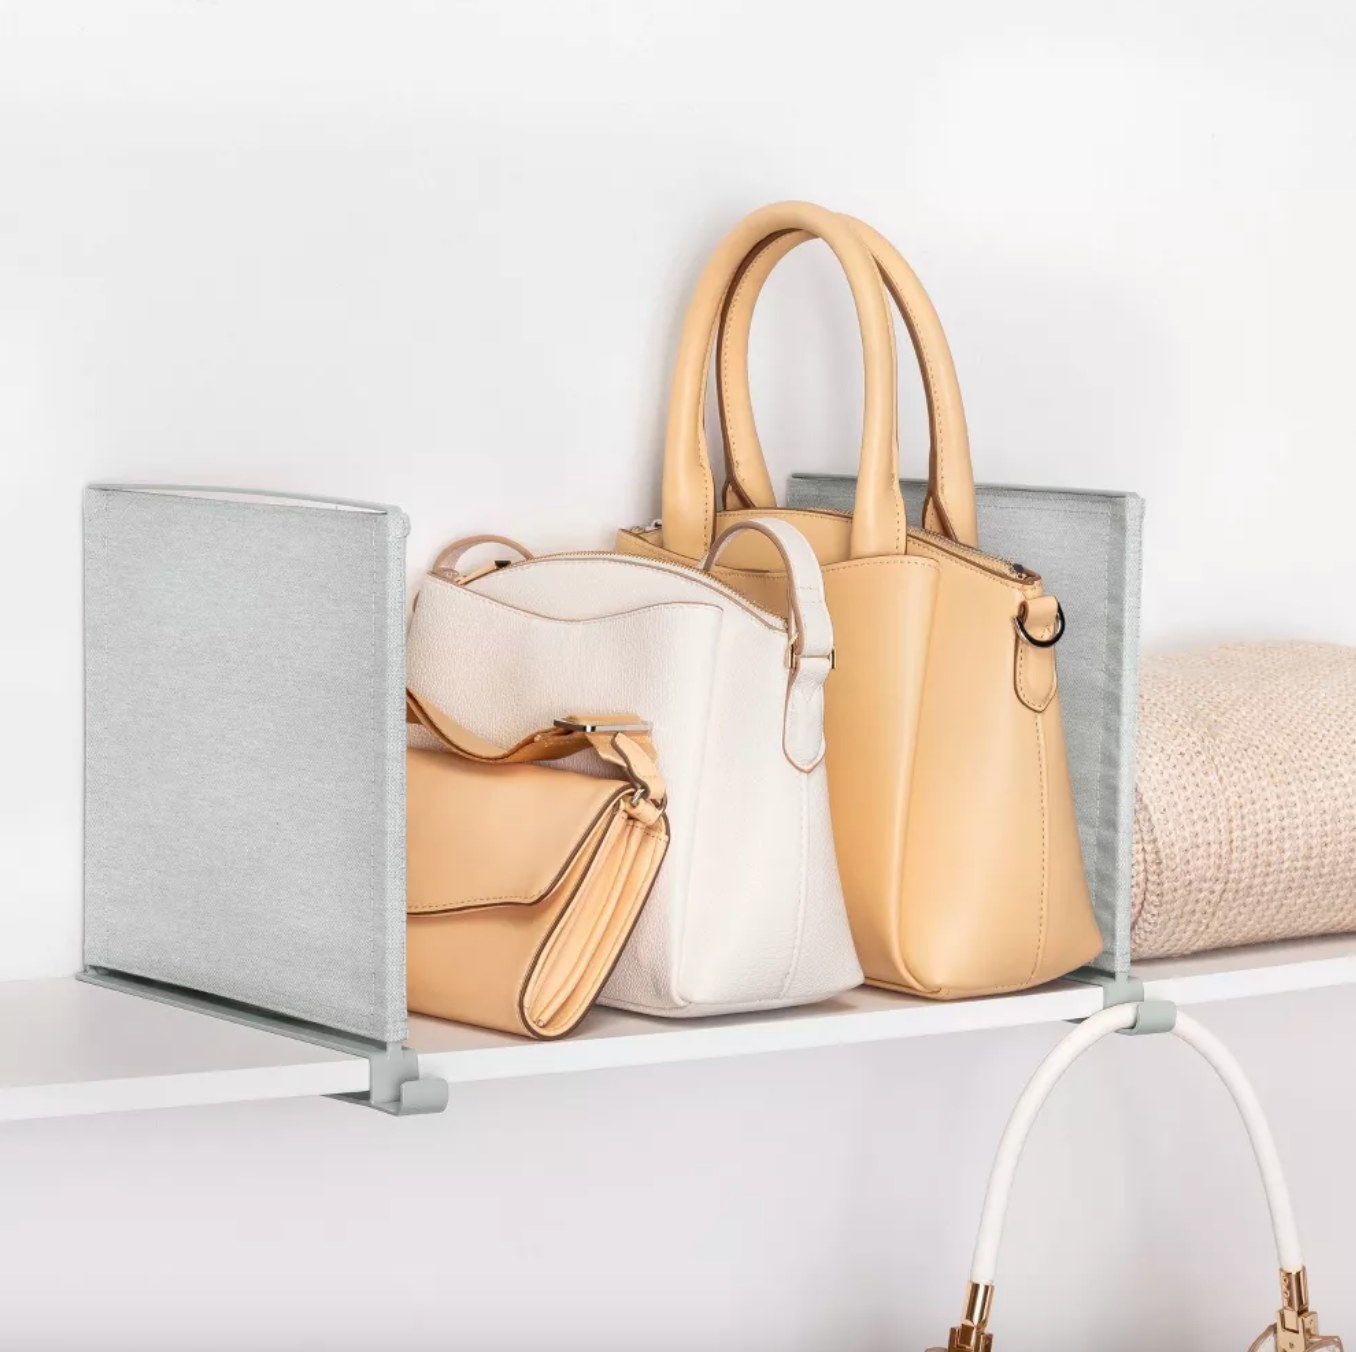 the two grey shelf dividers set up around several tan purses — an additional purse is hanging from the attached hooks on the front of the dividers